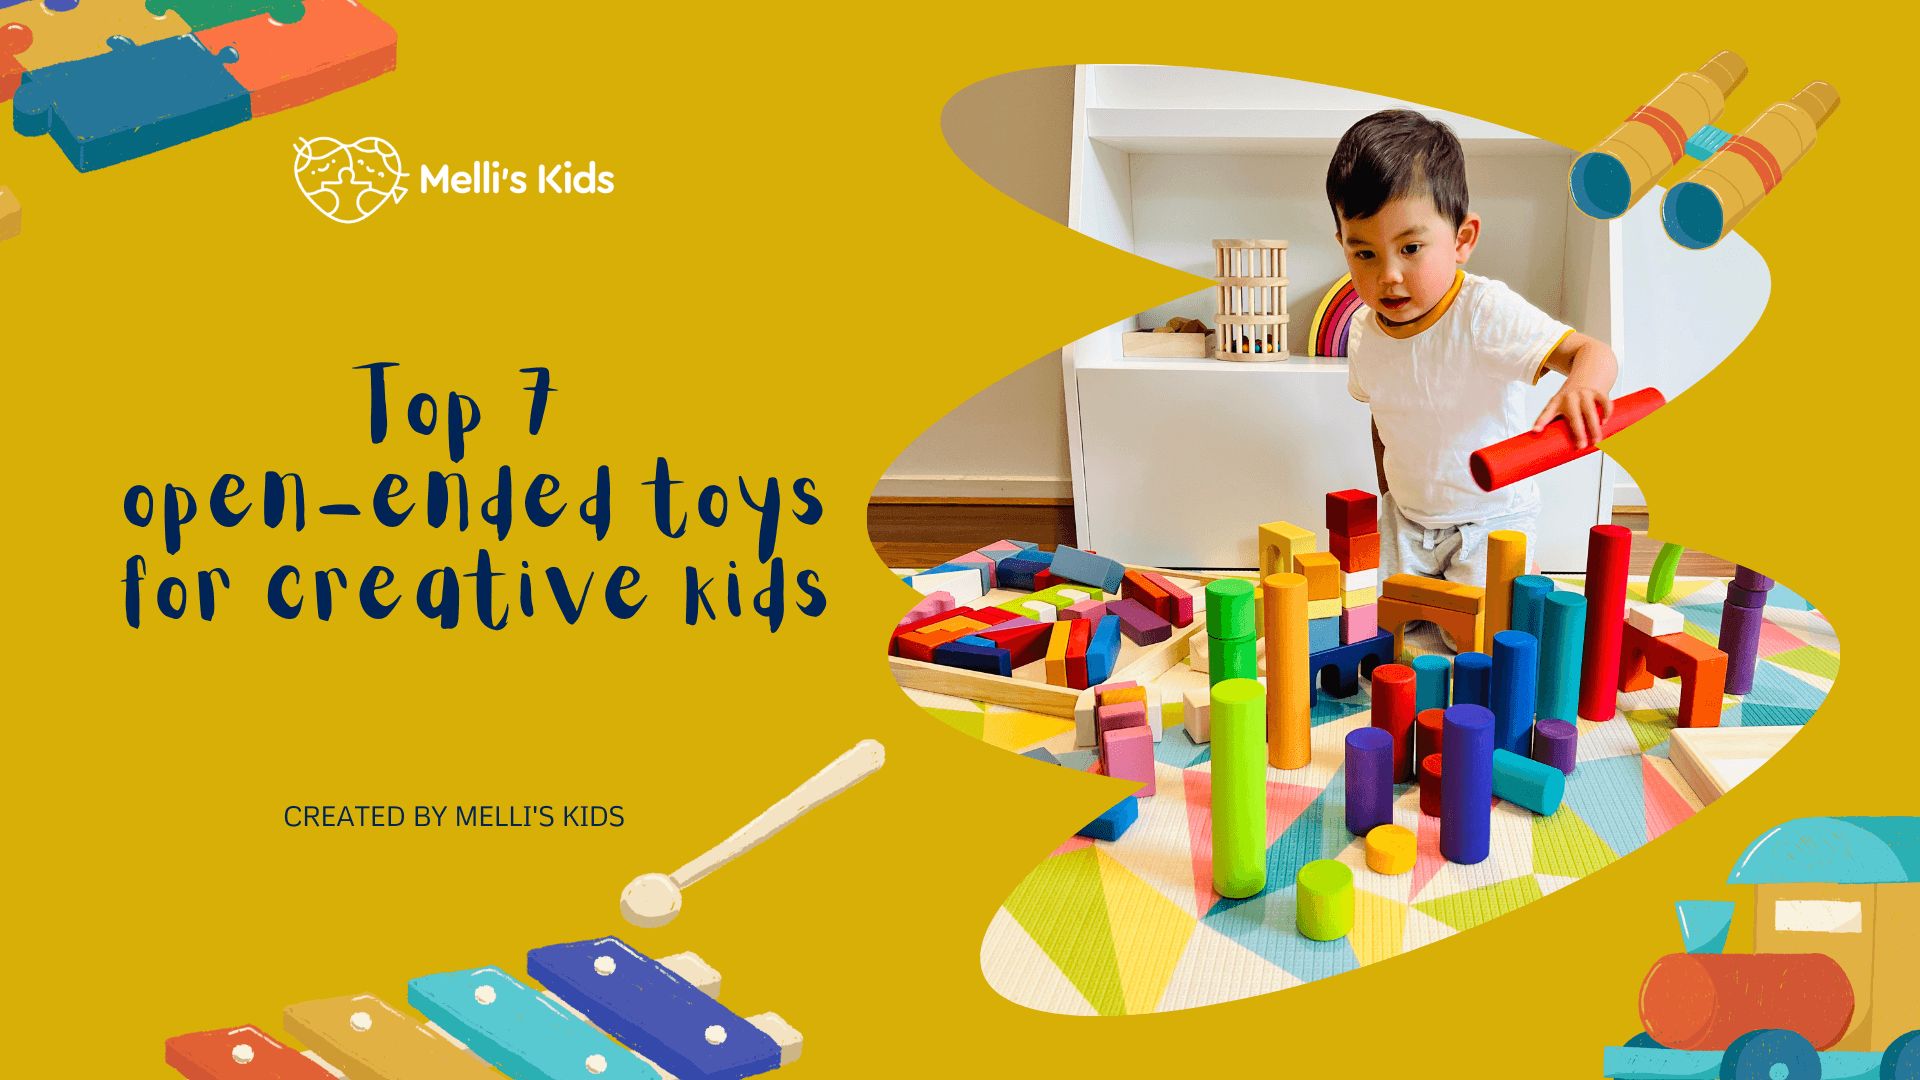 Top 7 open-ended toys for creative kids - Melli's Kids